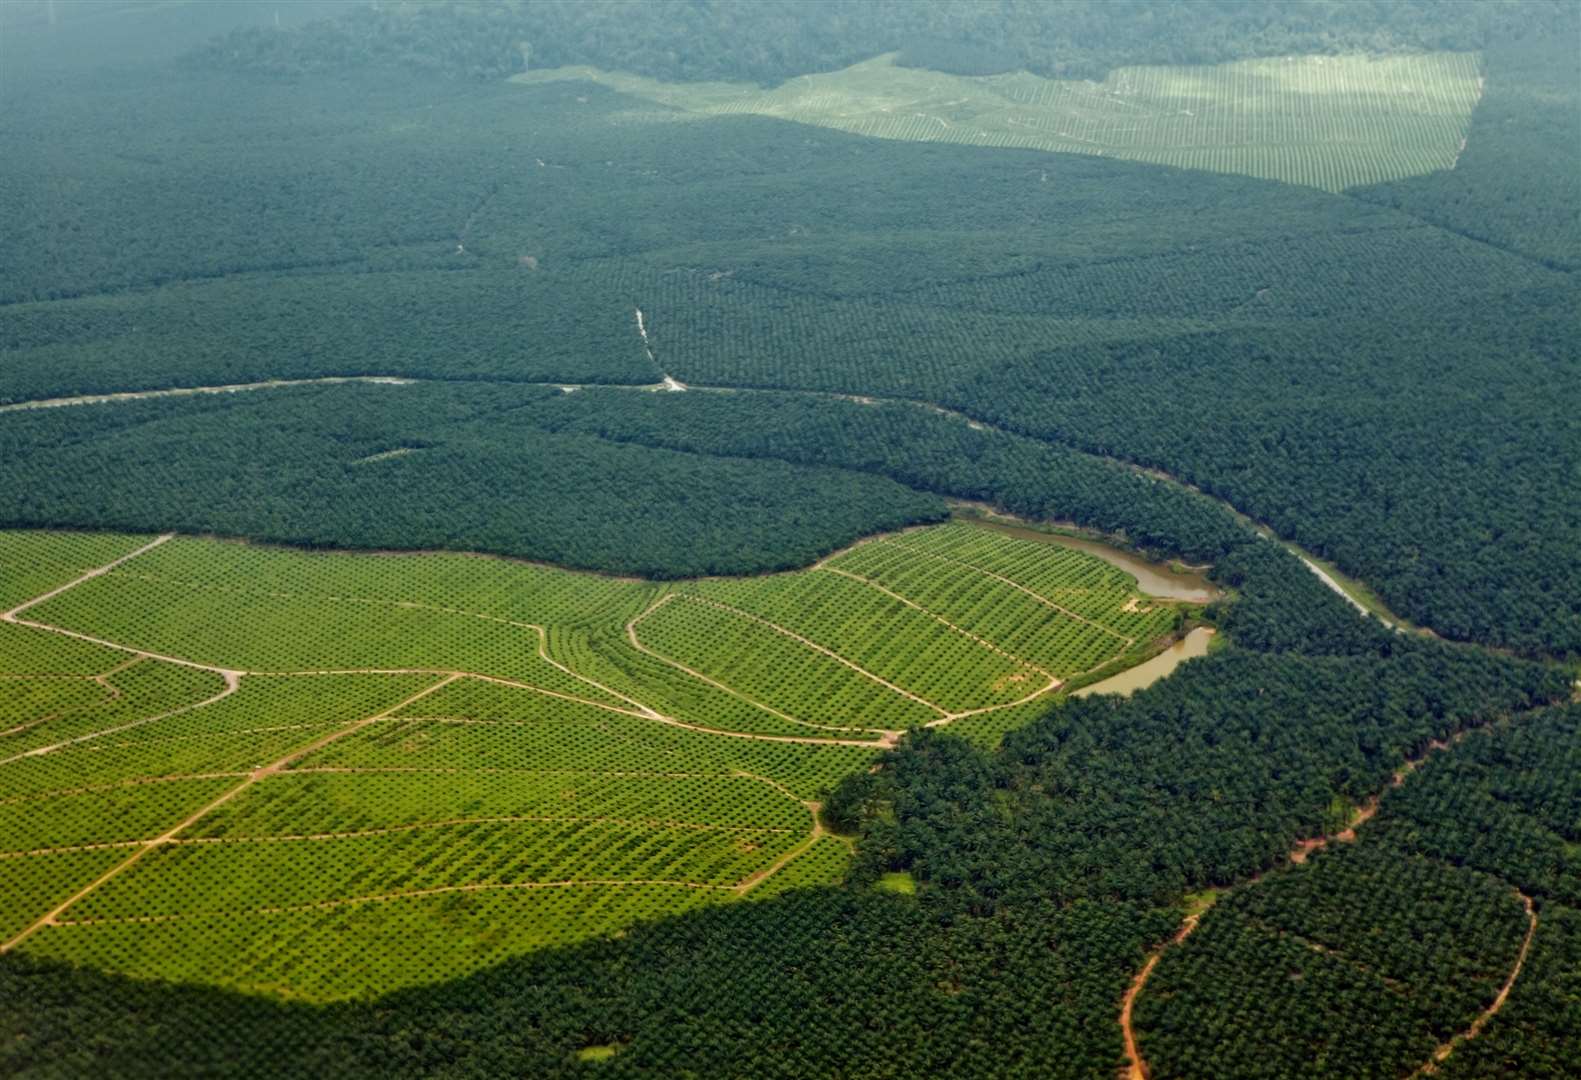 Oil palm plantations in northeastern Borneo, state of Sabah, Malaysia. Recently planted oil palms can be seen in the bright green grassy areas and a tiny bit of natural rainforest still struggles for survival farther away.